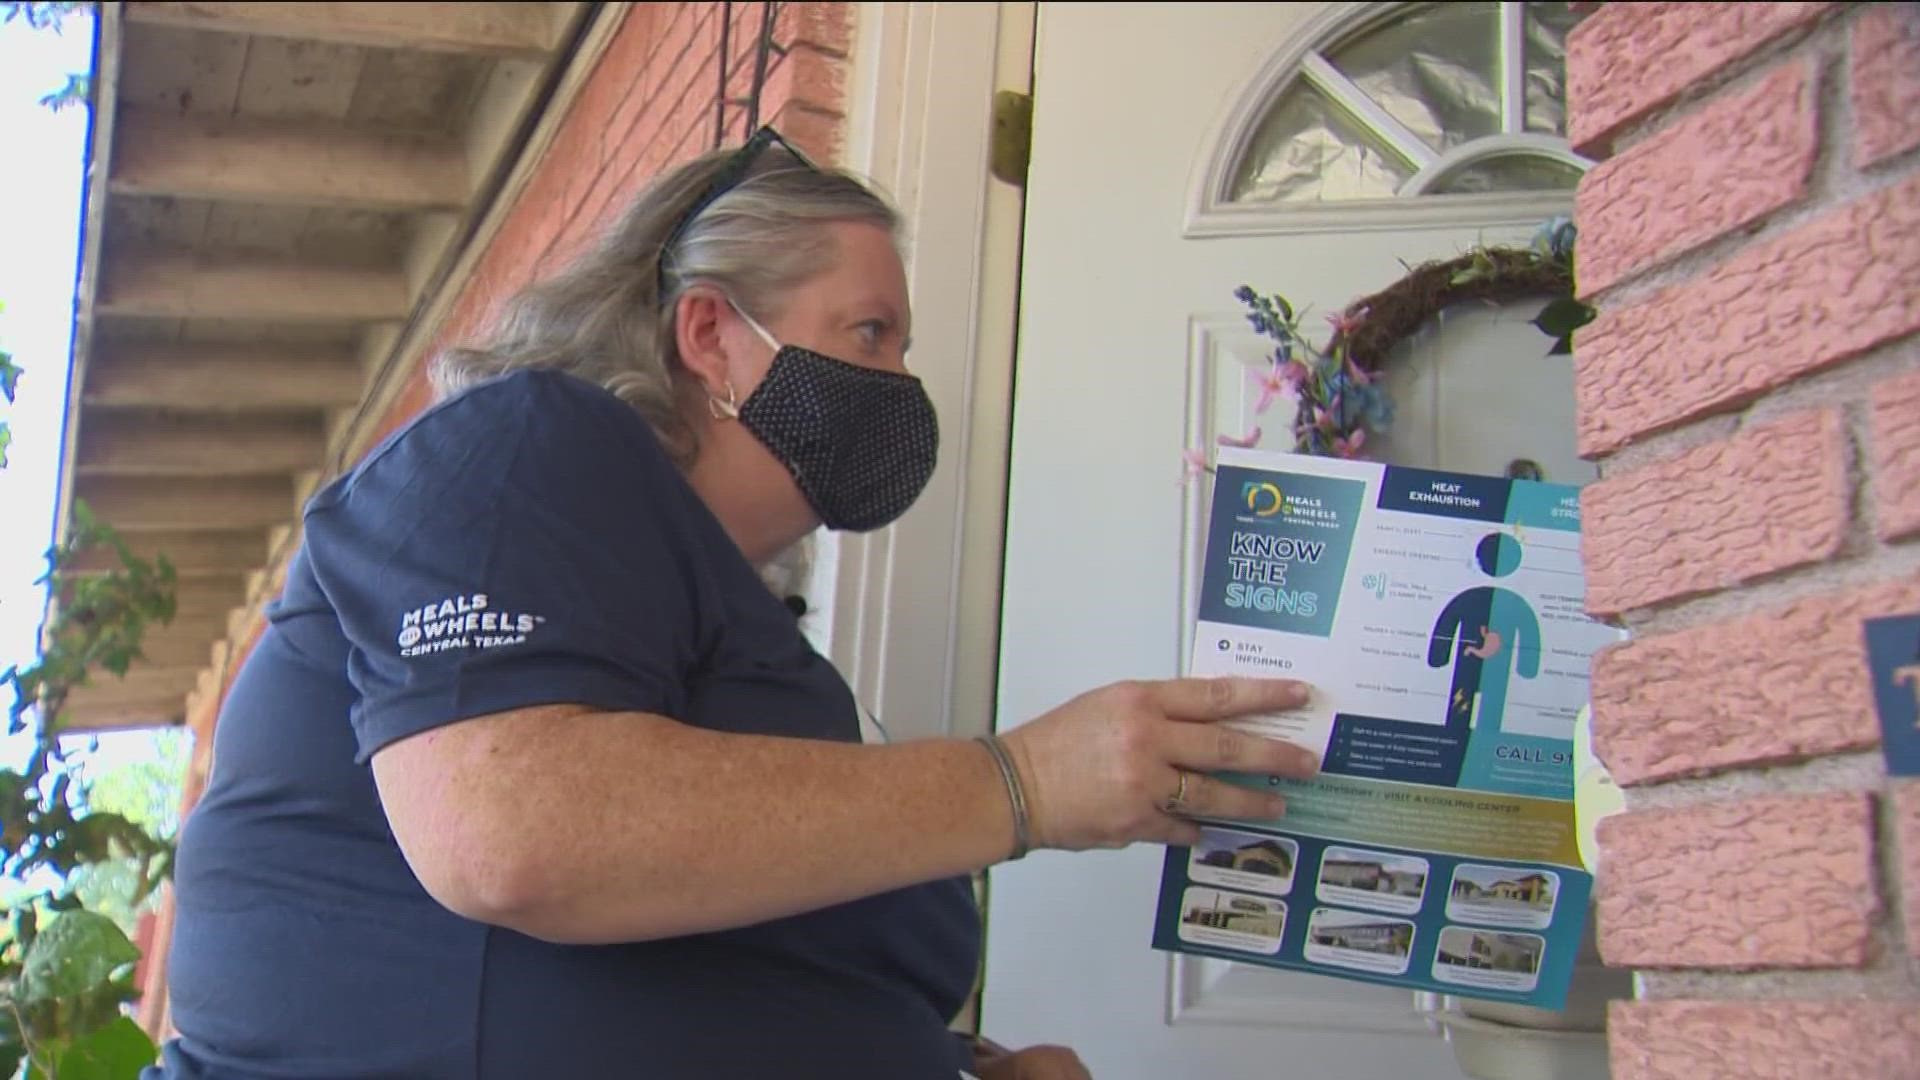 KVUE reporter Matt Fernandez spoke with an organization that hopes to protect the elderly during this heatwave.